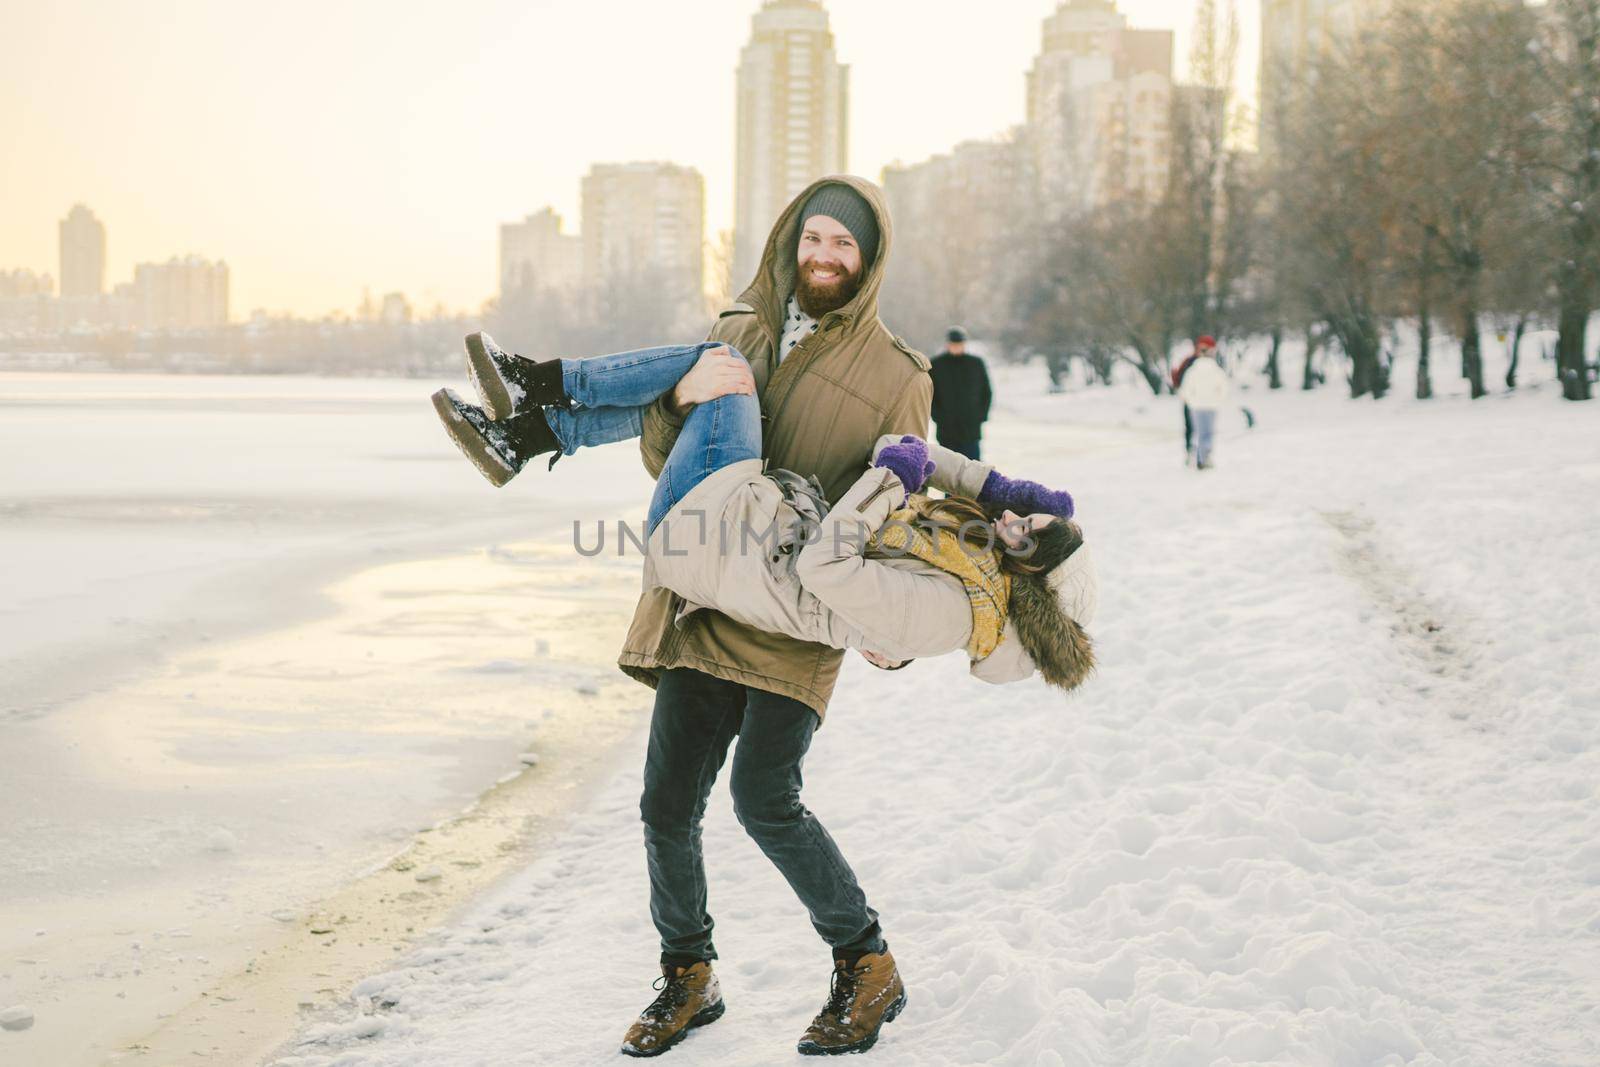 Theme outdoor activities in winter. Loving couple man and woman Caucasian joy happiness happiness love emotions on the shore of the lake. The guy wears holdings a girl by Tomashevska